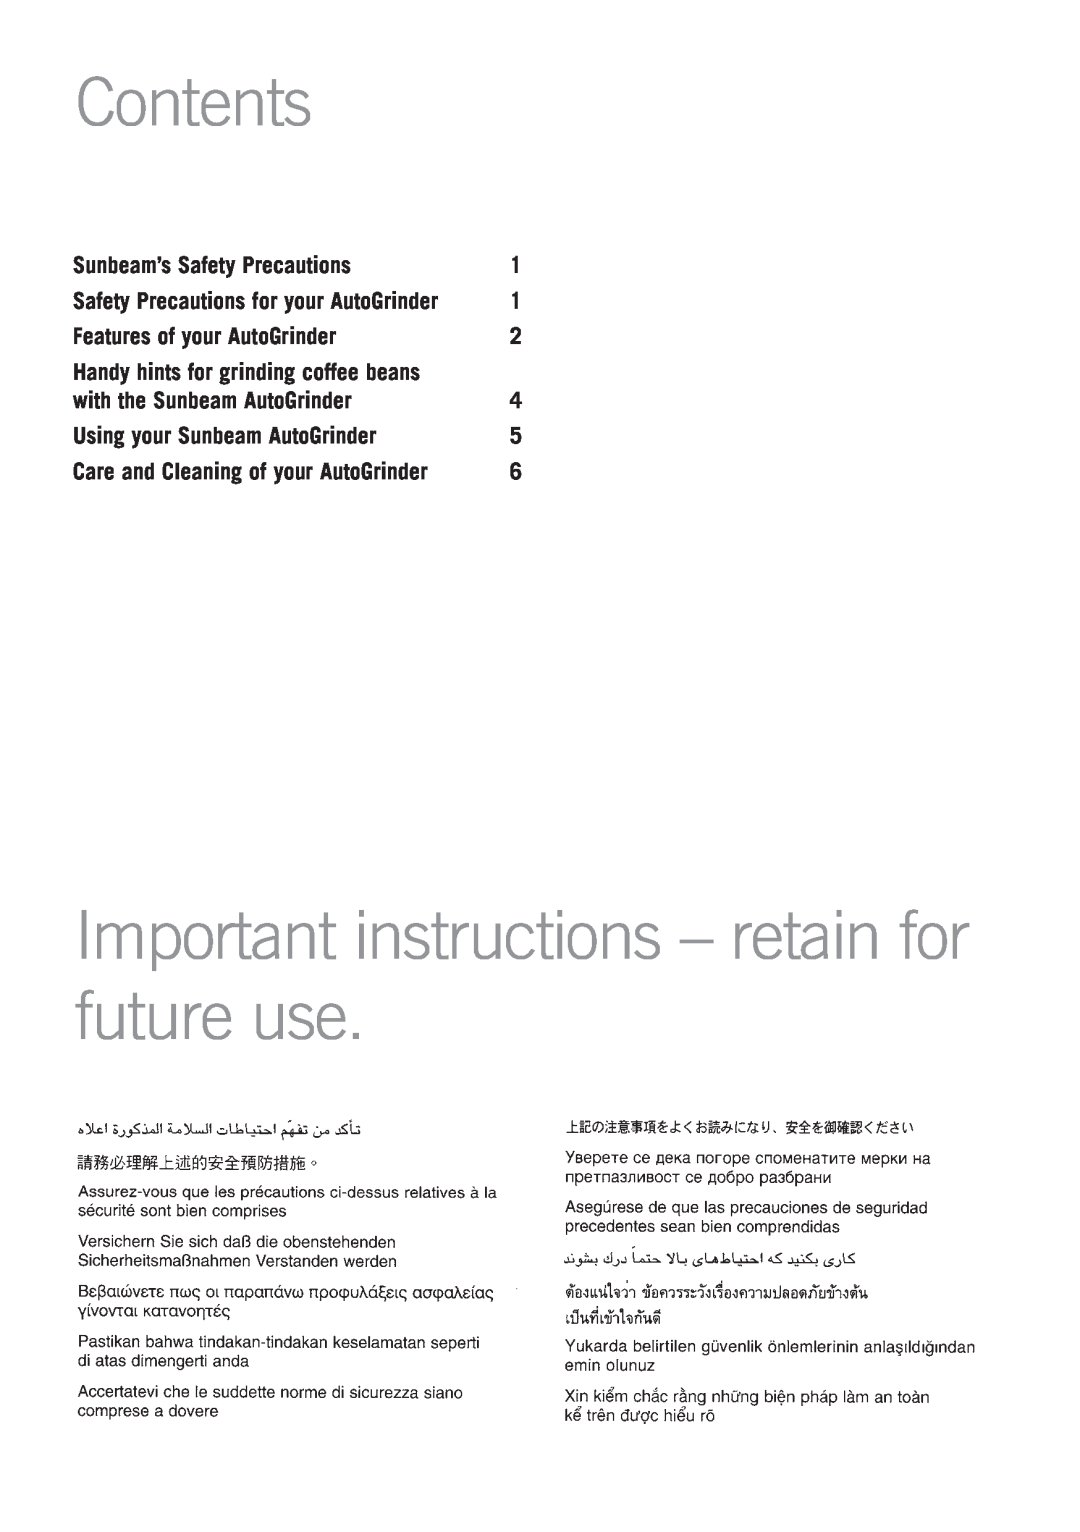 Sunbeam EM0415 manual Contents, Important instructions - retain for future use, Sunbeam’s Safety Precautions 